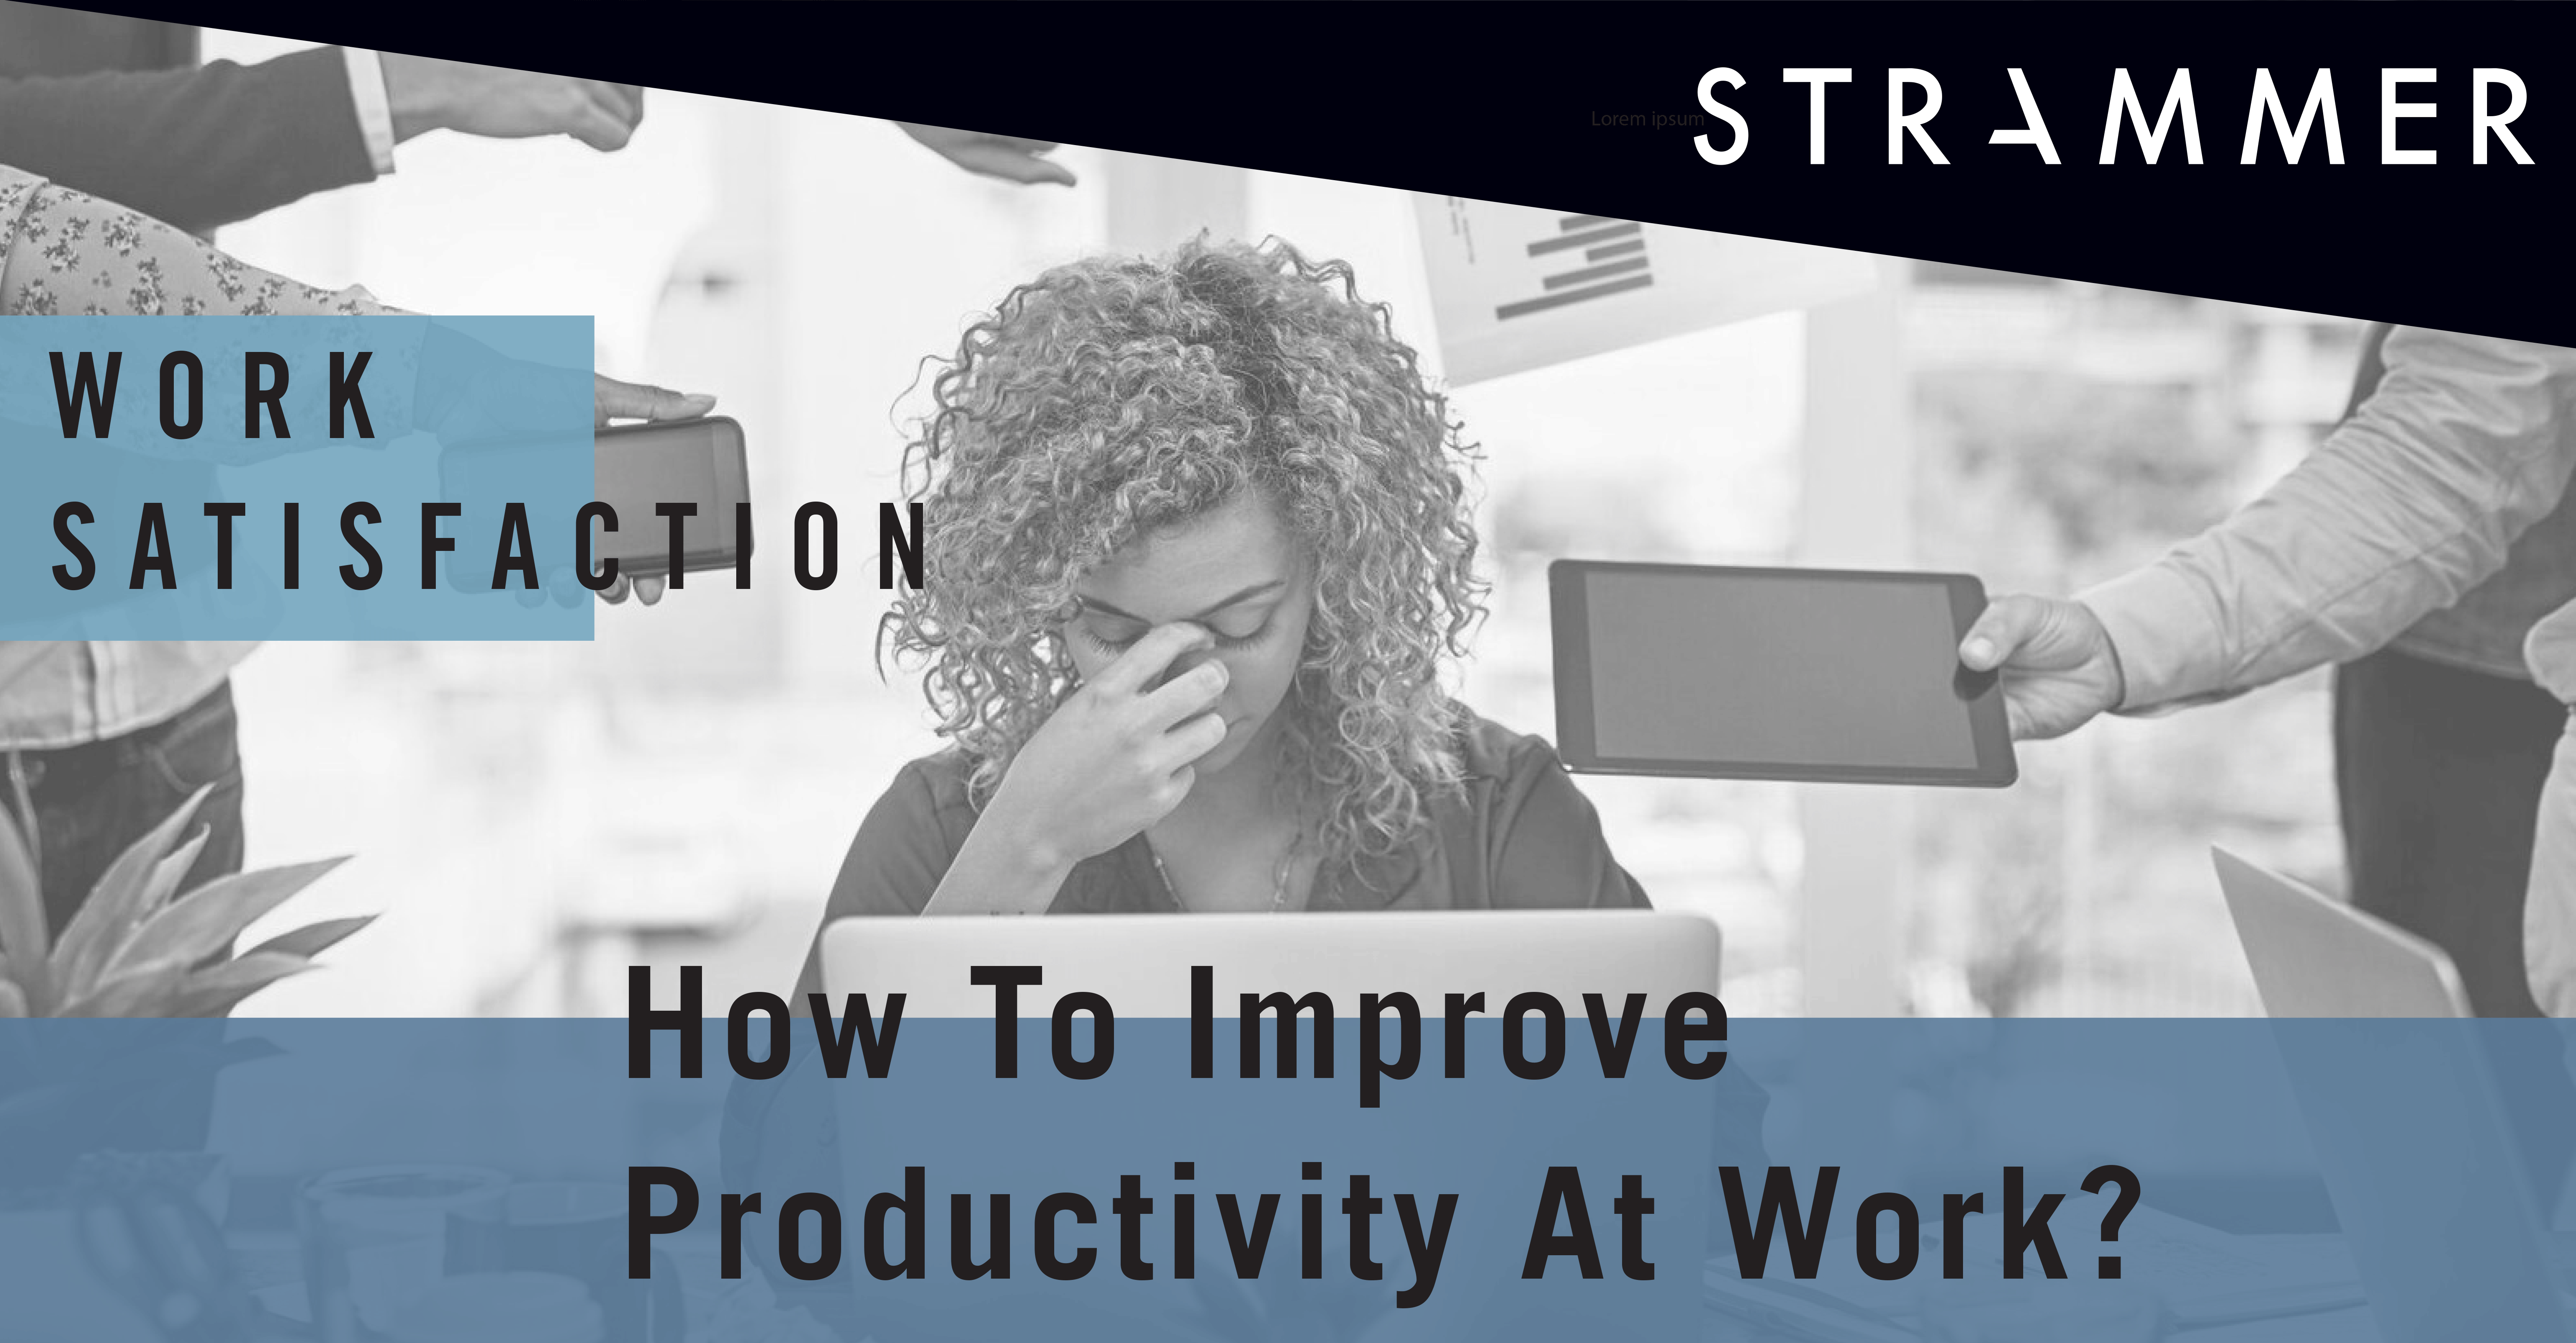 Workforce Productivity: How to Improve It?